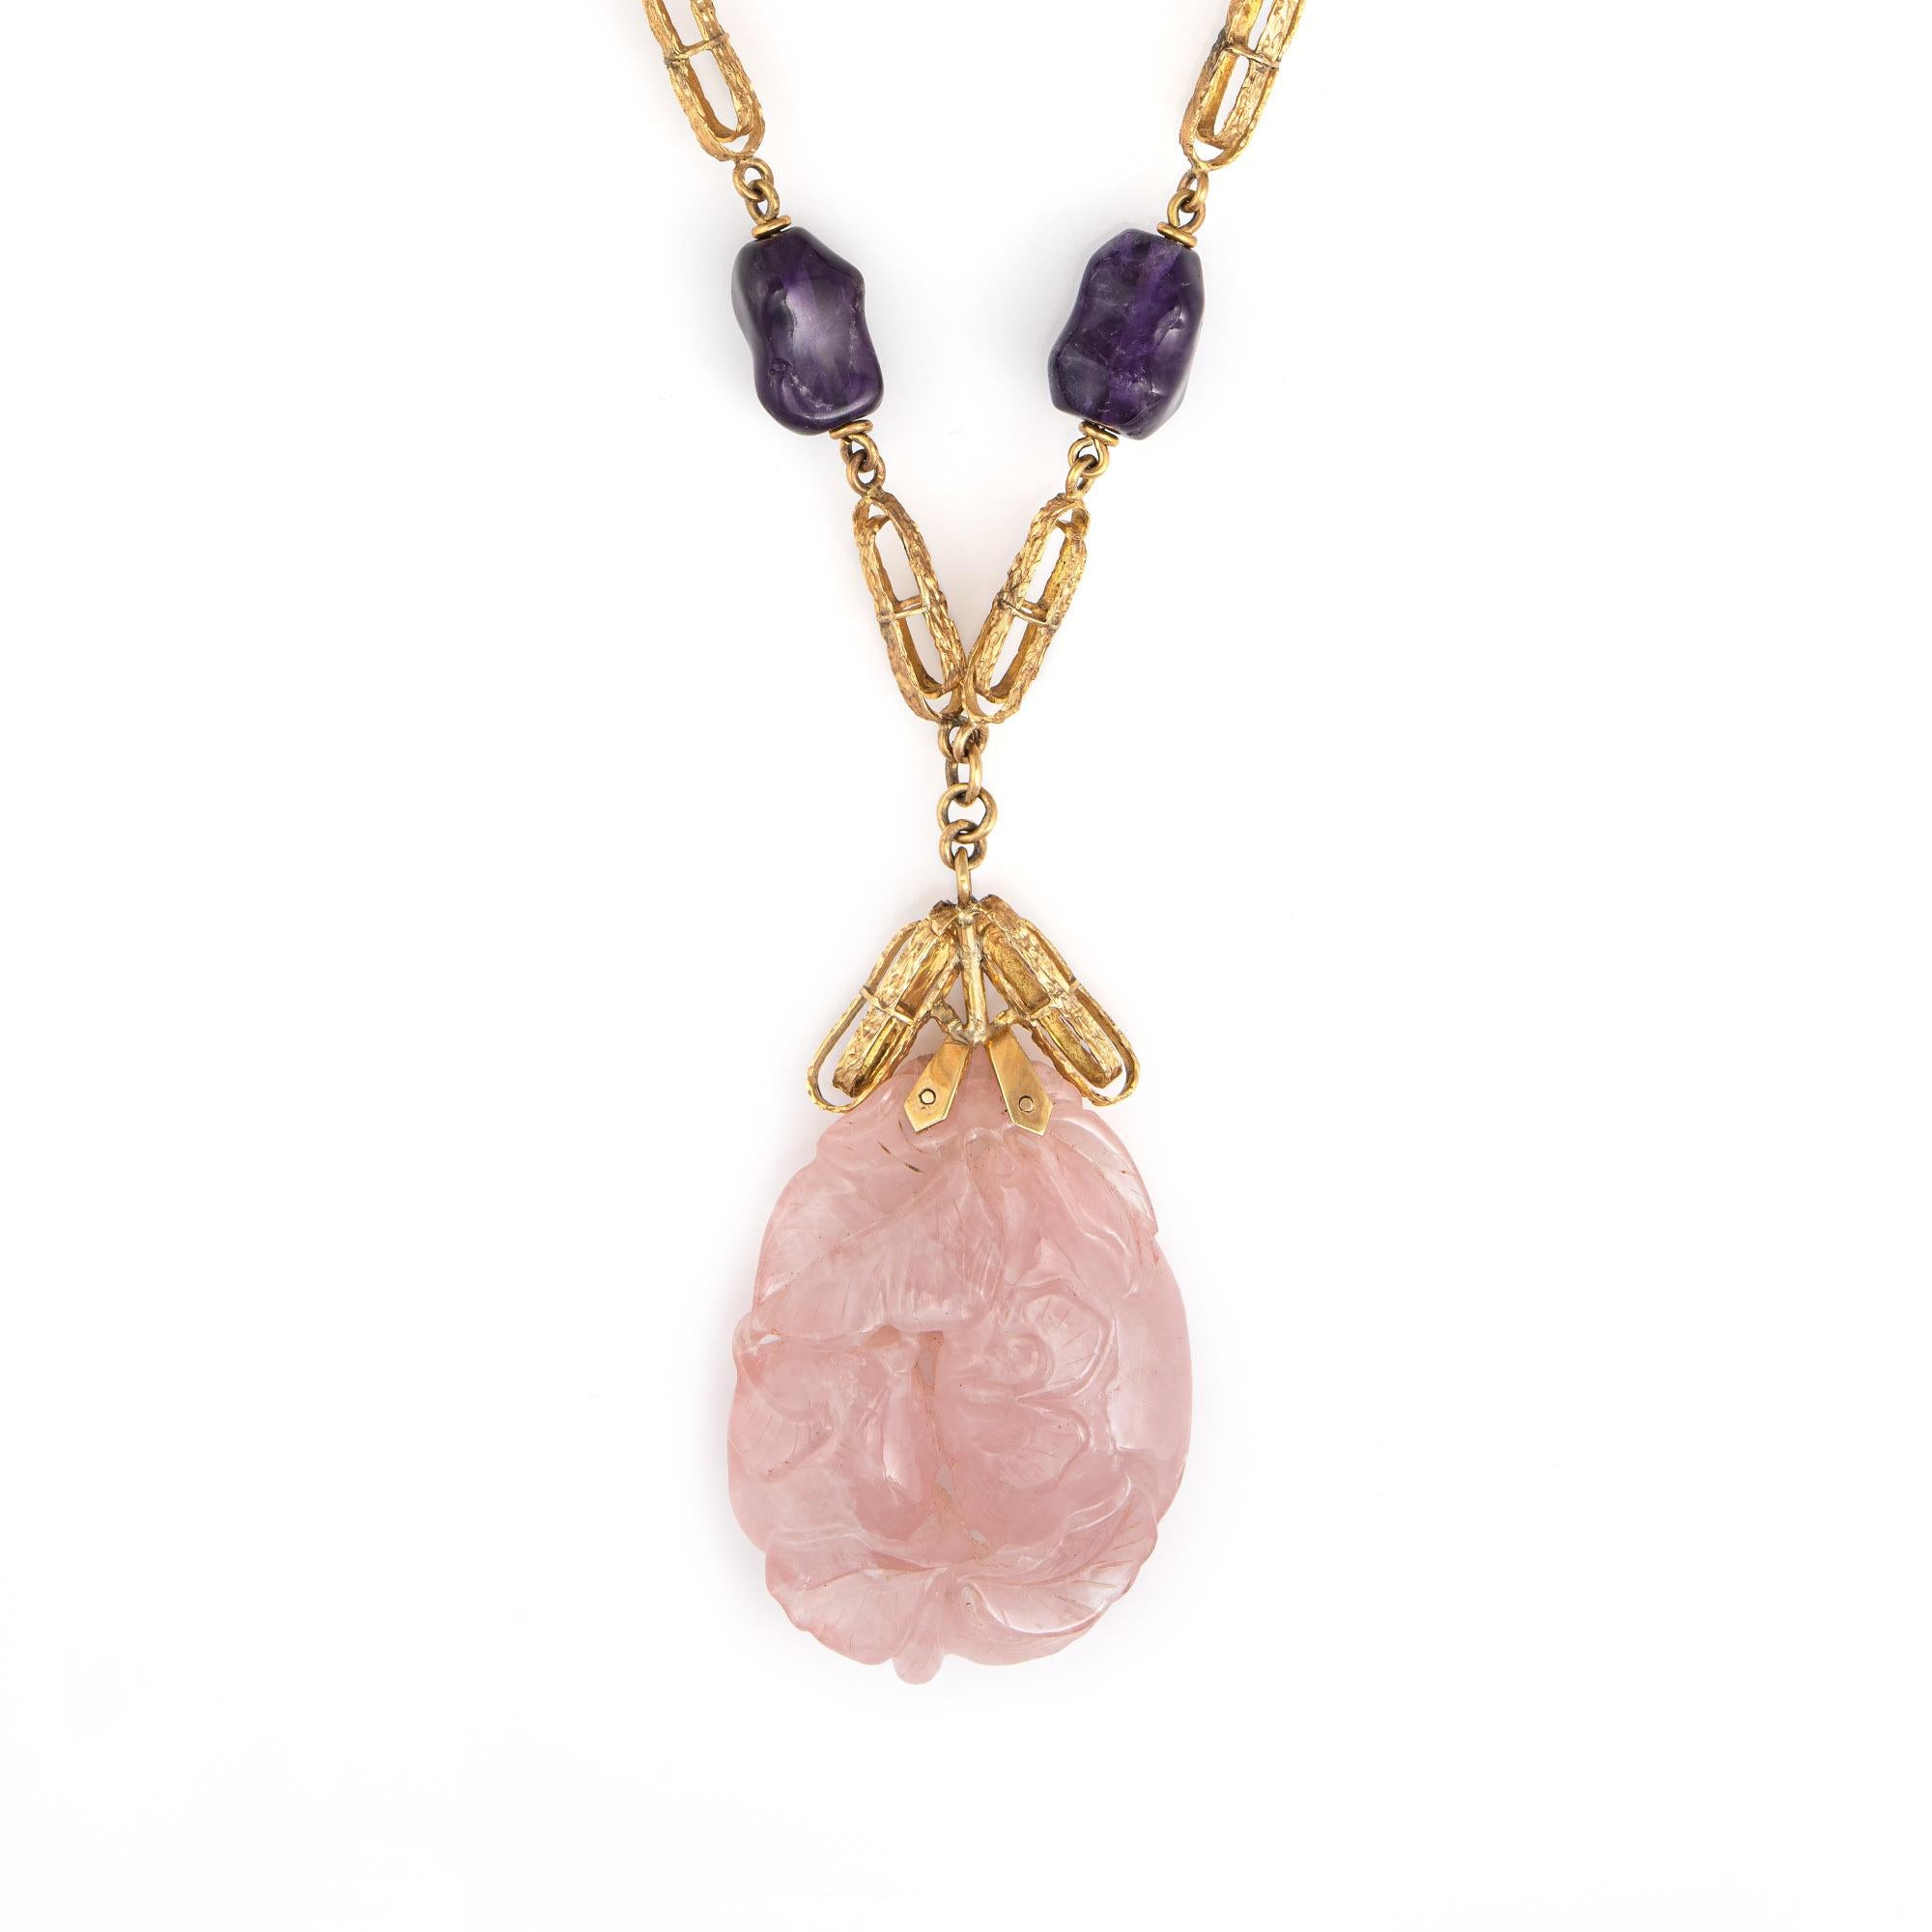 Finely detailed vintage amethyst & rose quartz necklace crafted in 14 karat yellow gold (circa 1970s). 

Amethyst beads measure (average) 3/4 x 1/2 inch (in very good condition and free of cracks or chips). One large piece of rose quartz (drop)